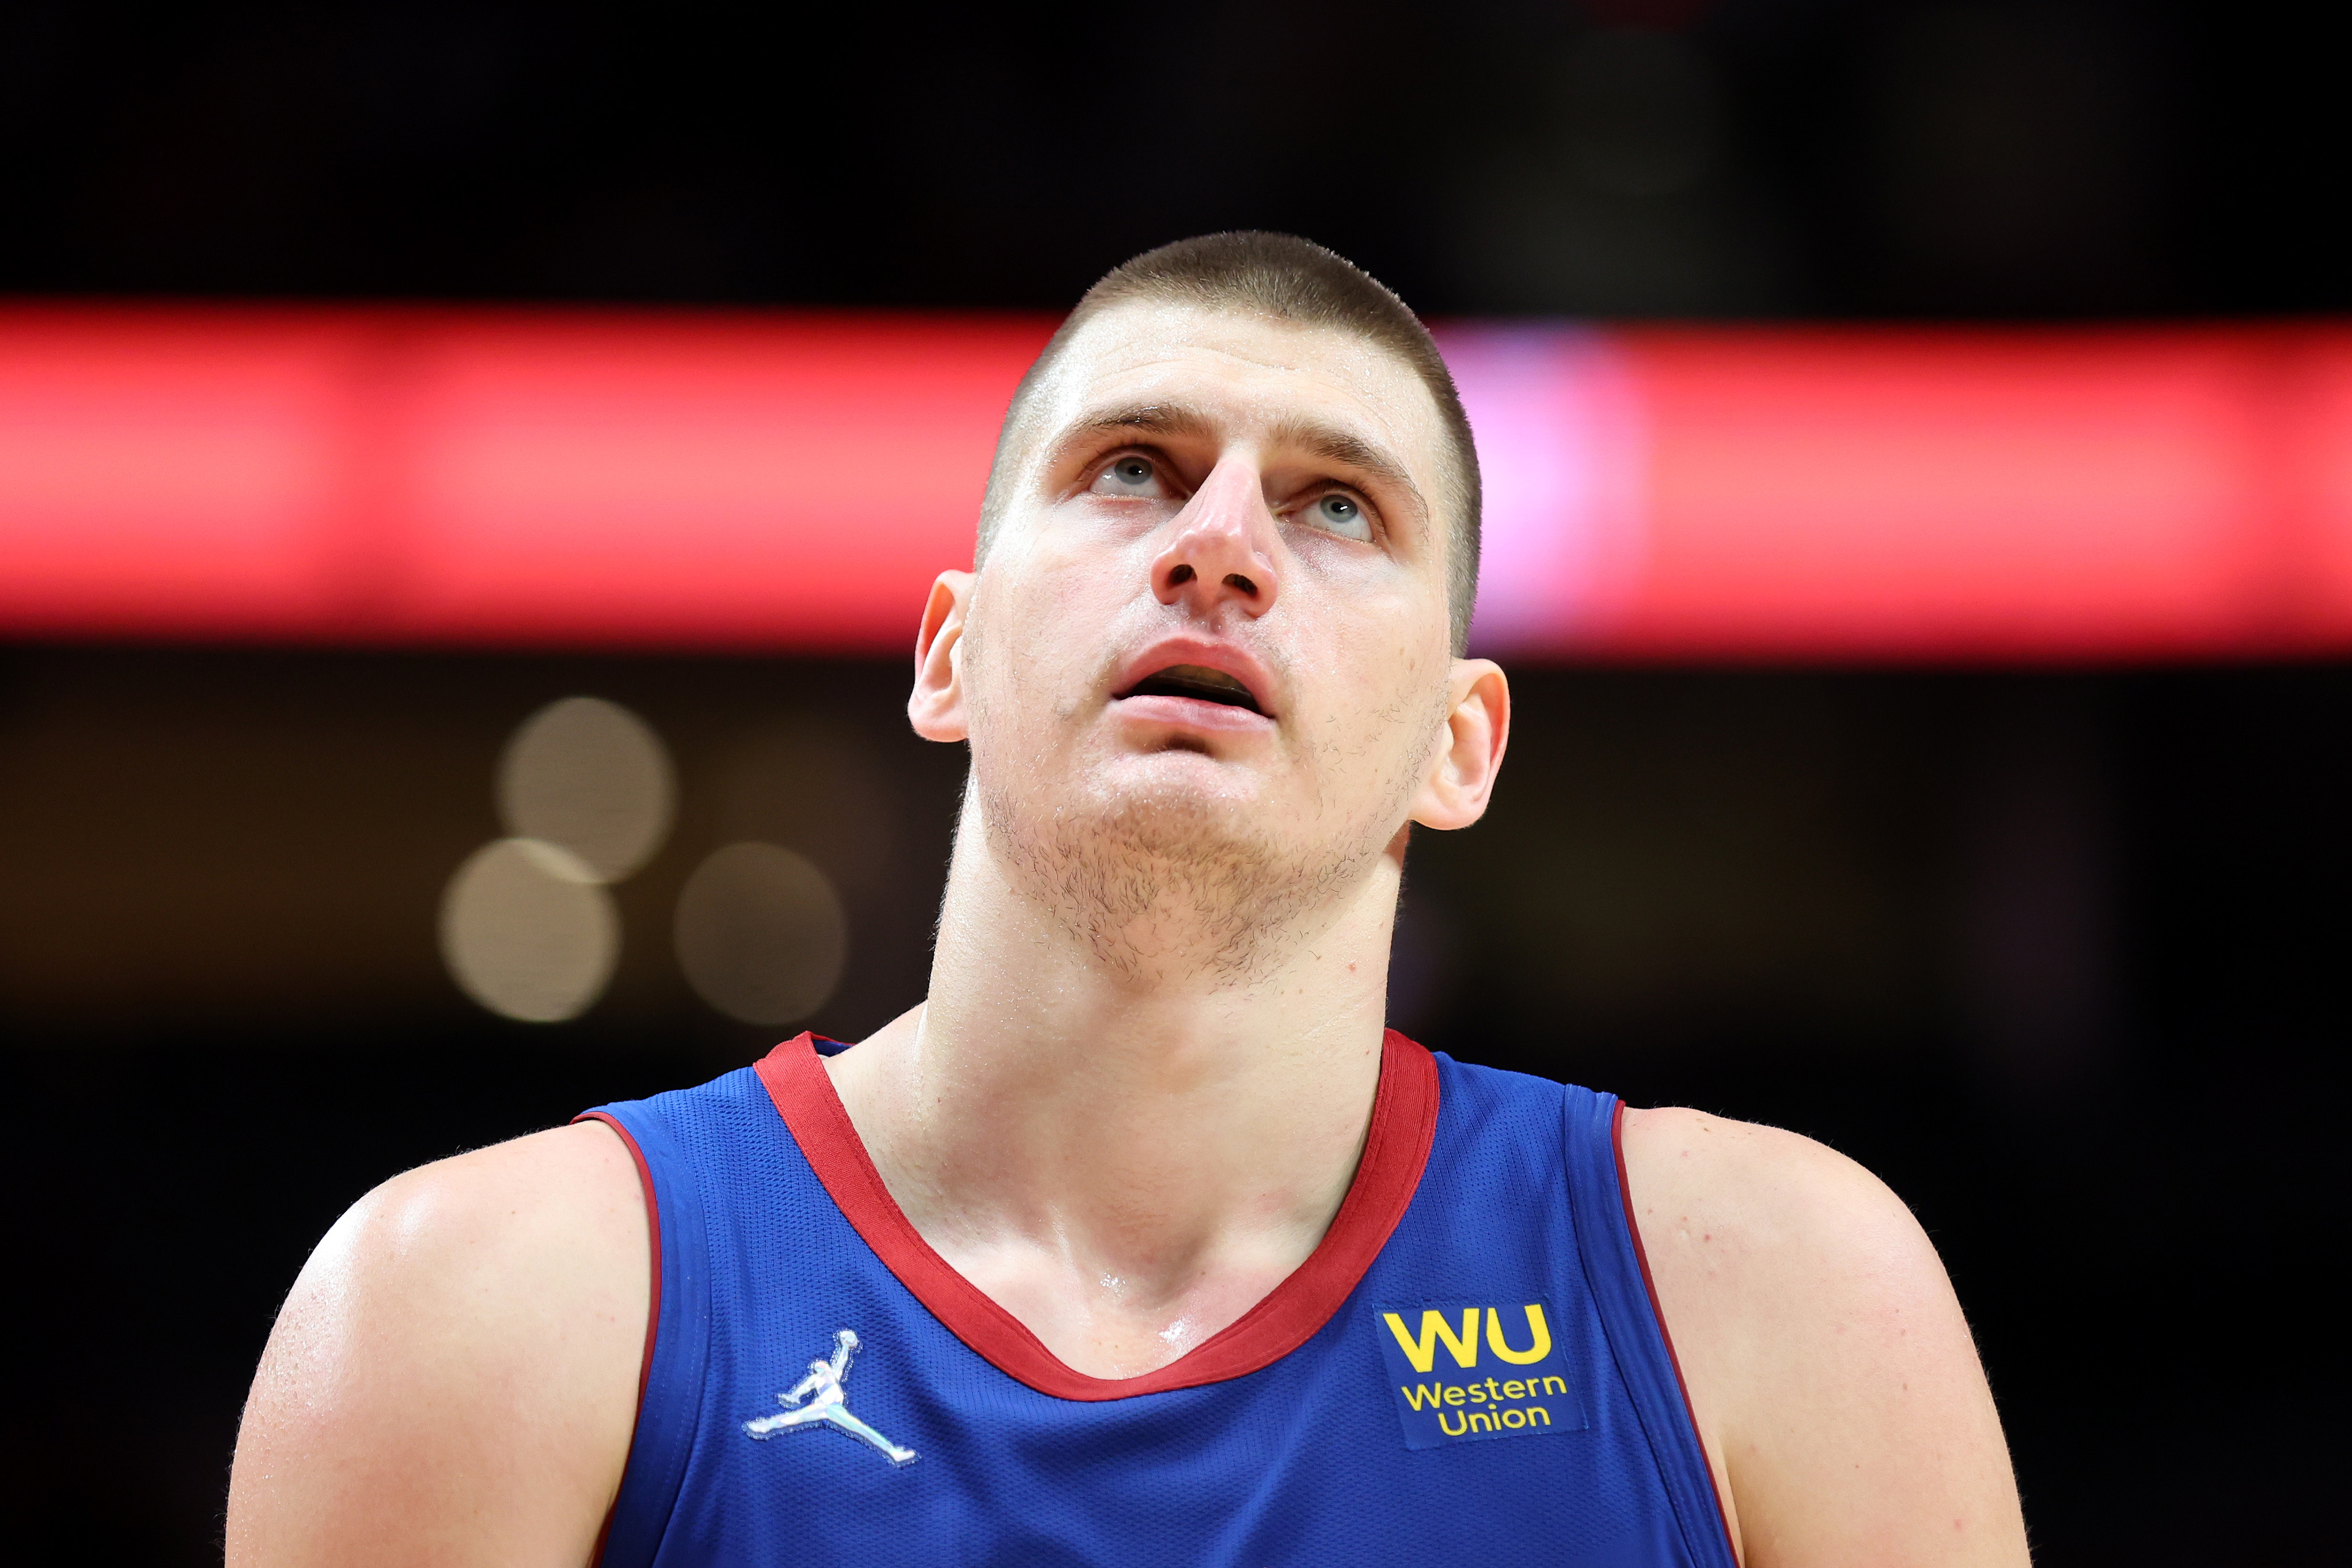 Denver Nuggets center Nikola Jokic looks on during an NBA game against the Portland Trail Blazers in February 2022